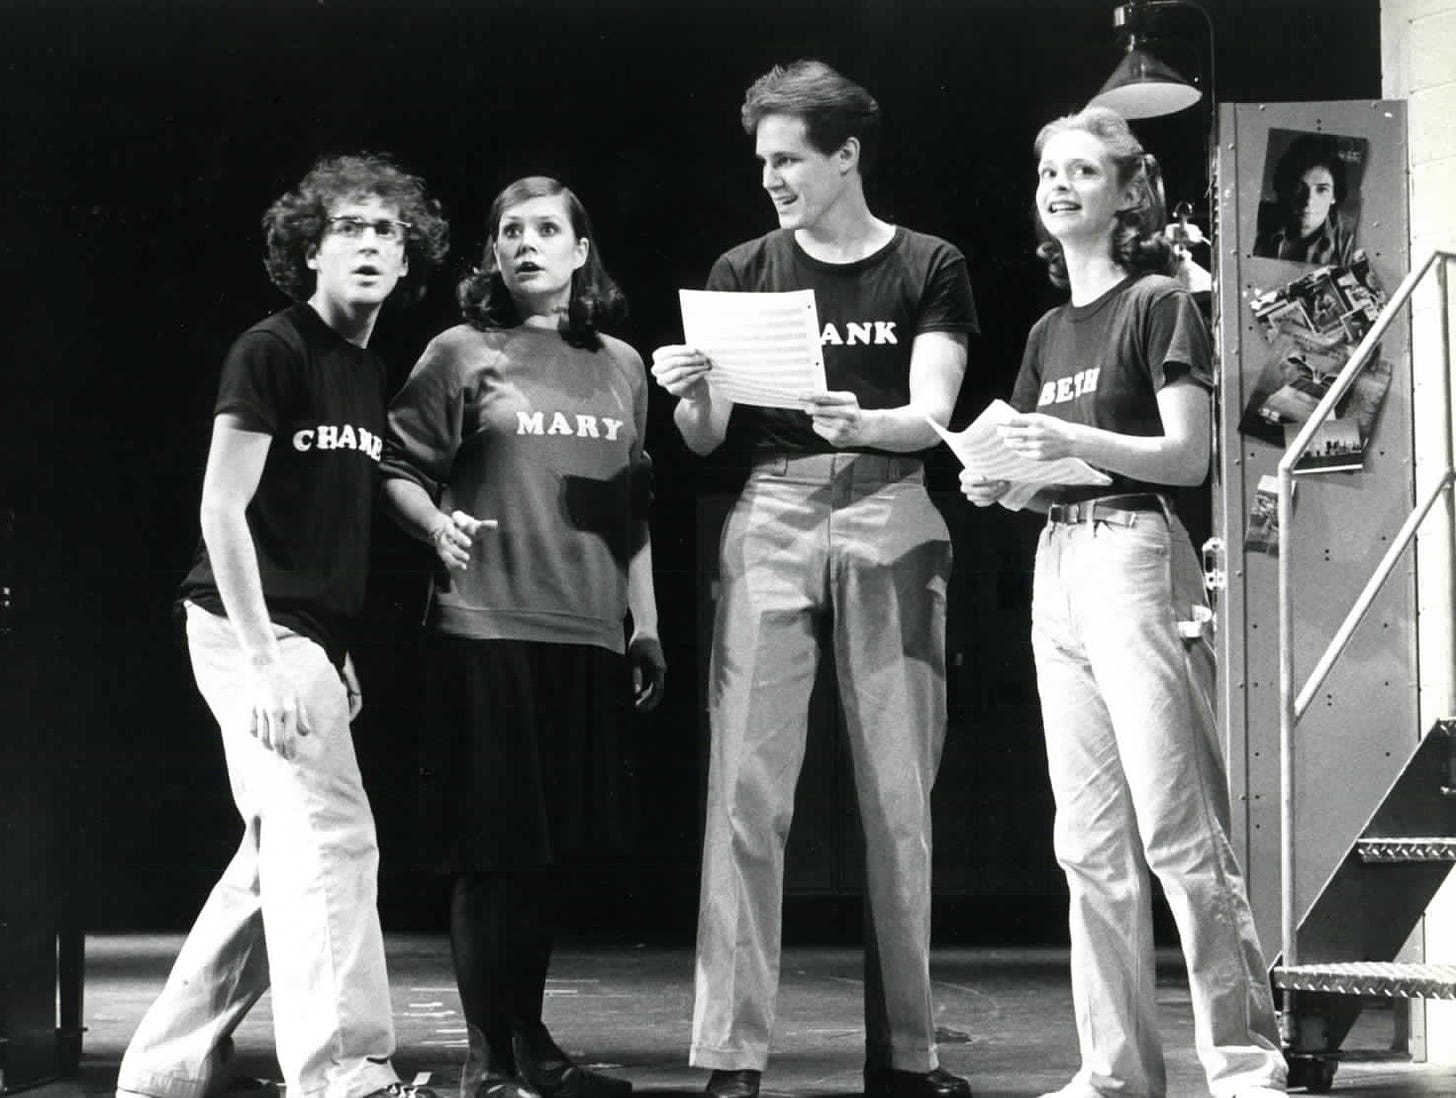 Black and white photograph of the cast in a scene from Merrily We Roll Along. The main characters are wearing sweatshirts with their names on them, standing next to a set resembling a high school locker.